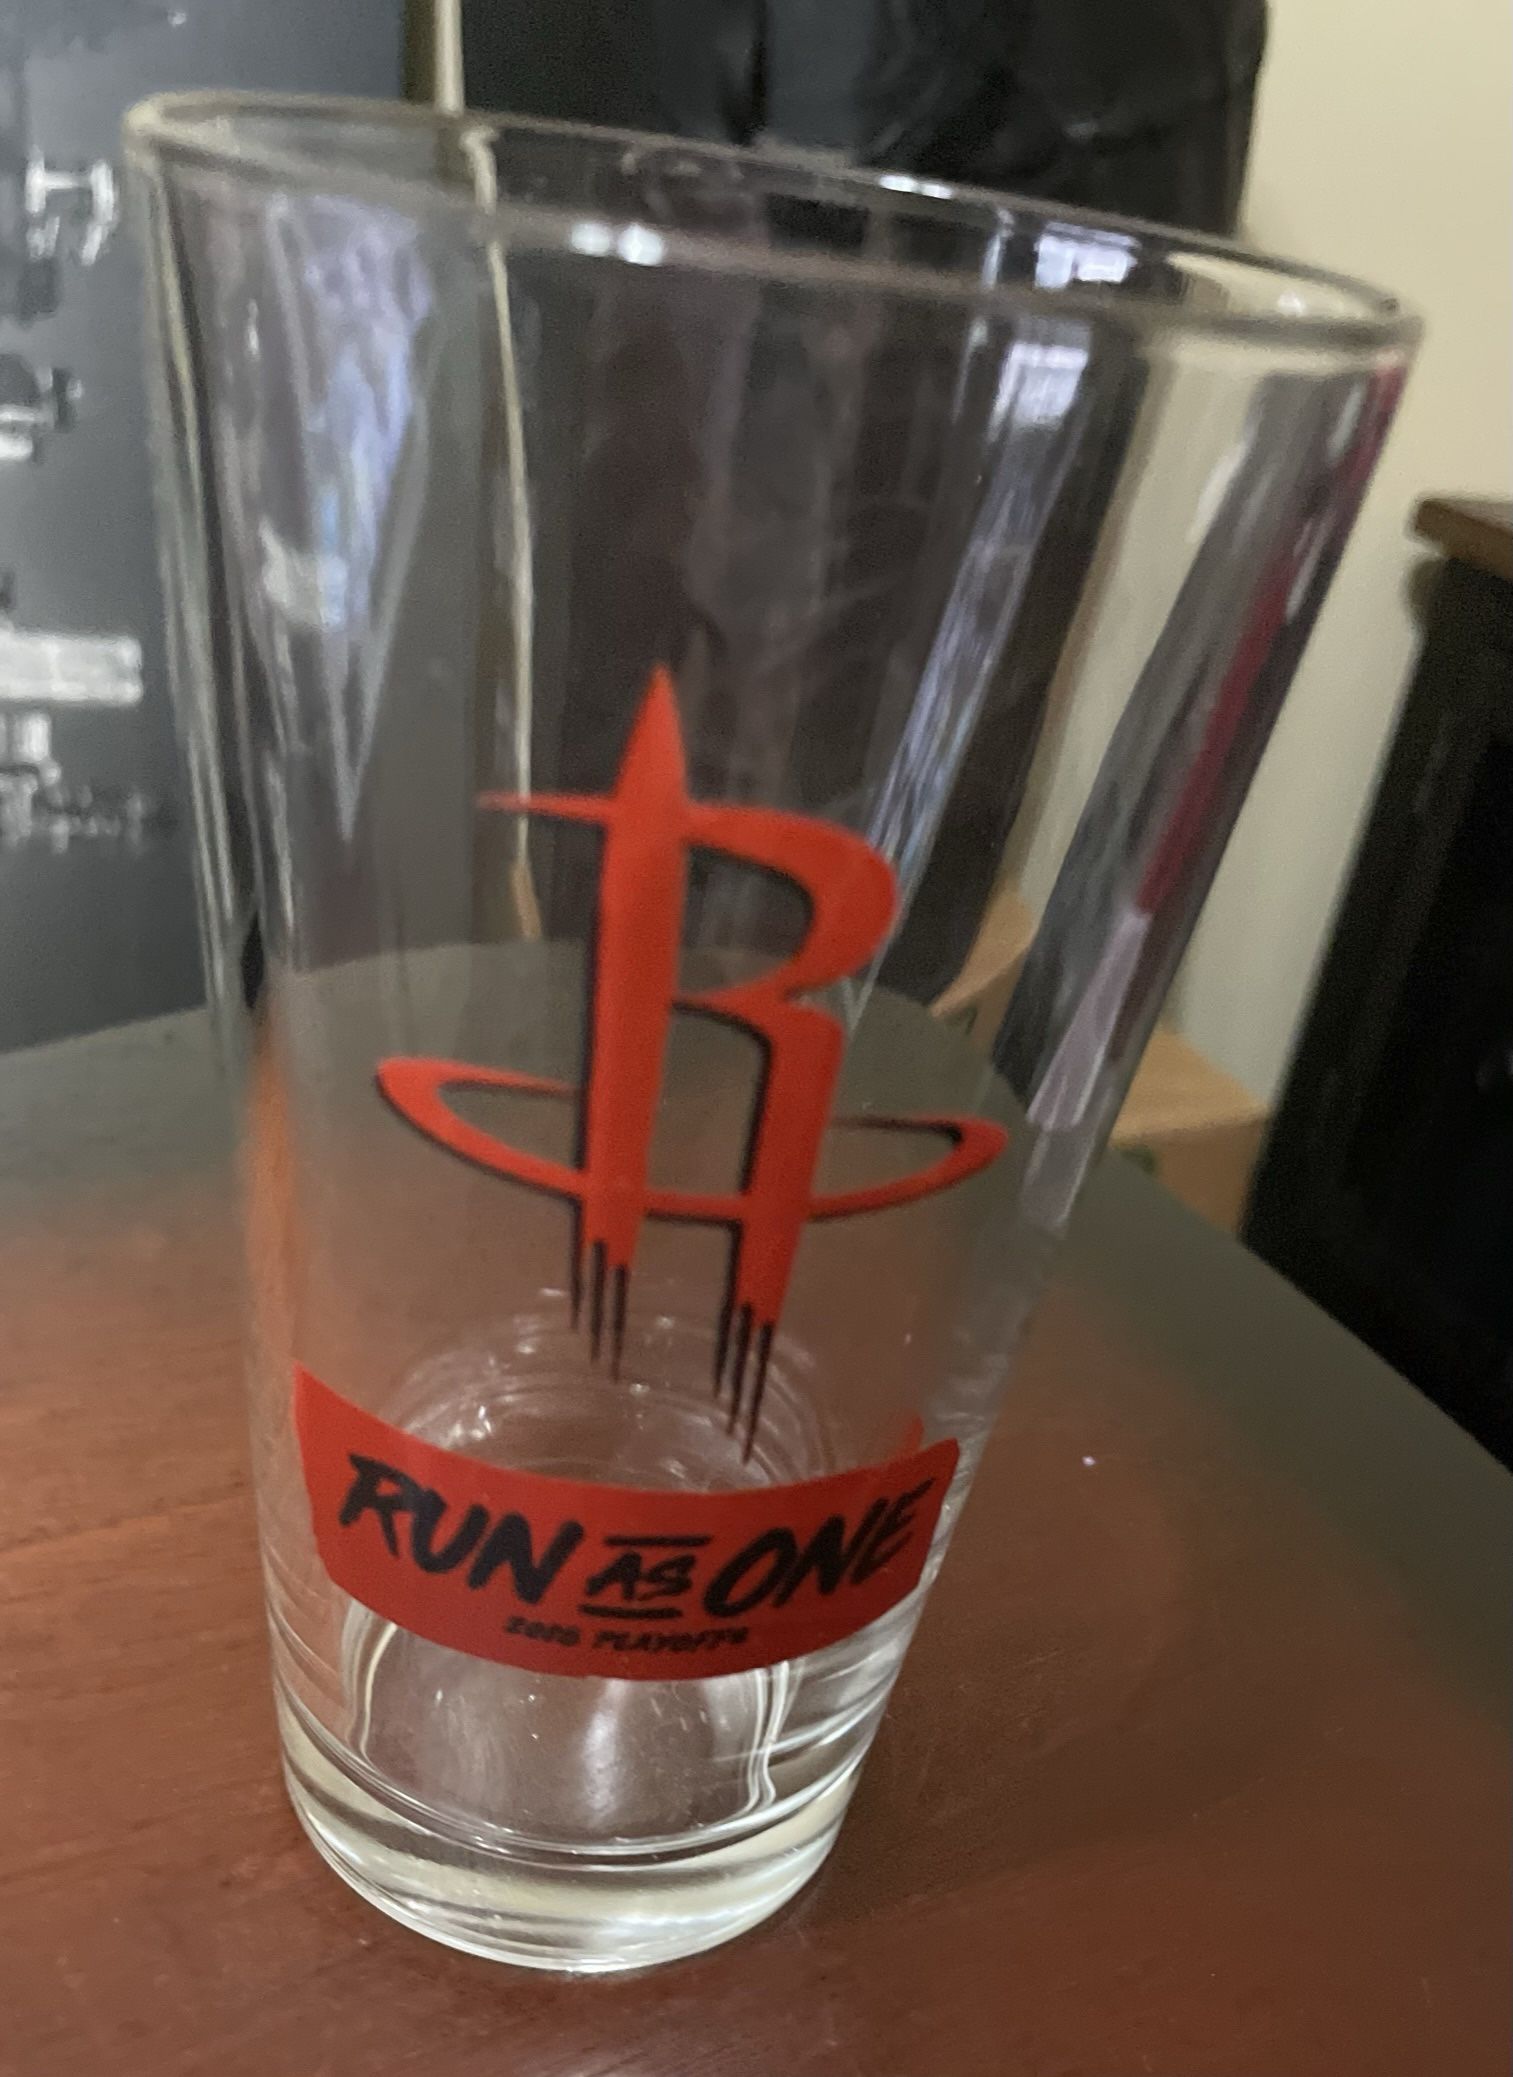 Houston rockets glass cup